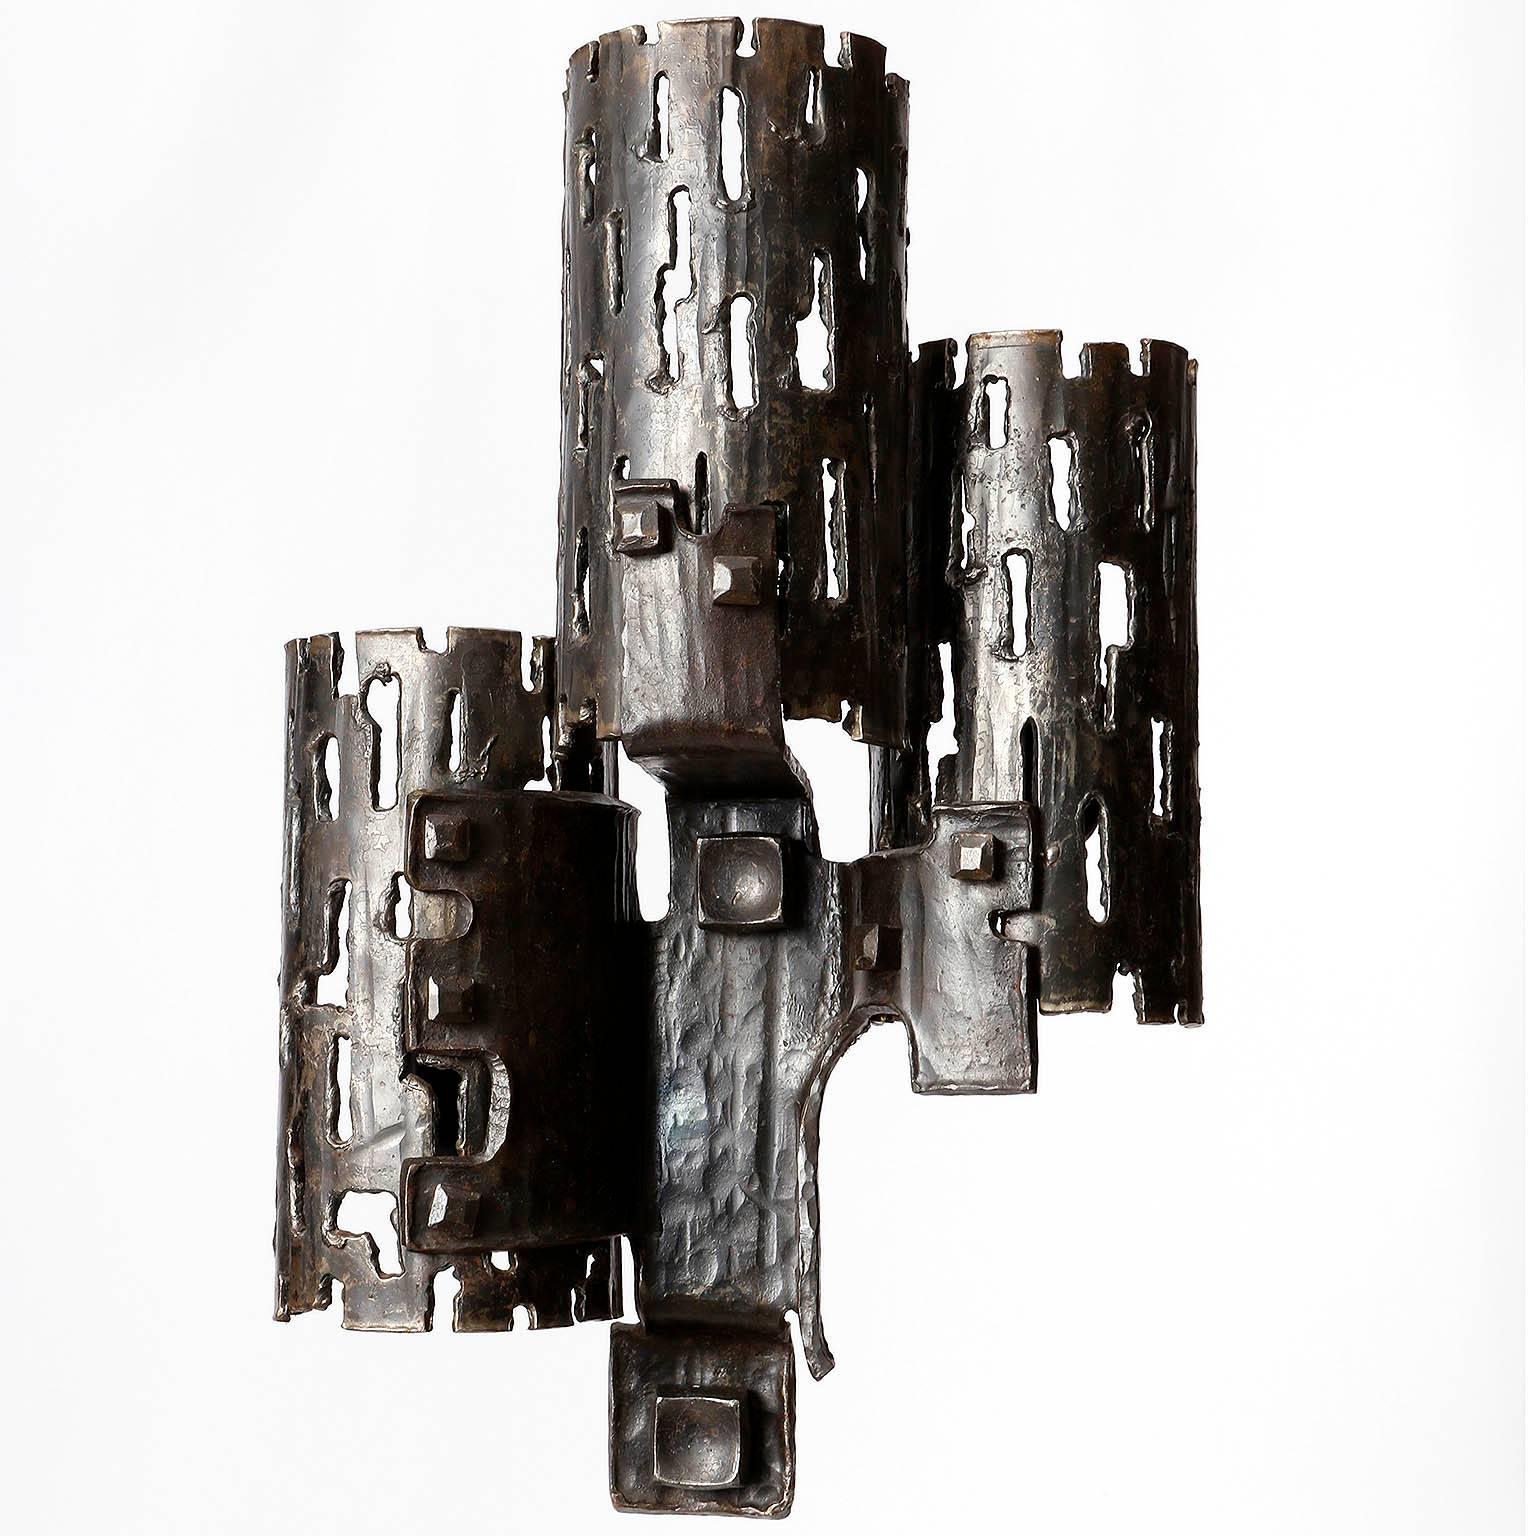 A pair of one-of-a-kind Brutalist style wall lamps made of metal with great patina, manufactured in Germany in Mid-Century, circa 1970 (end of 1960s or early 1970s). 
A massive and very impressive craftsmanship. Unqiue and handmade pieces.
Each lamp